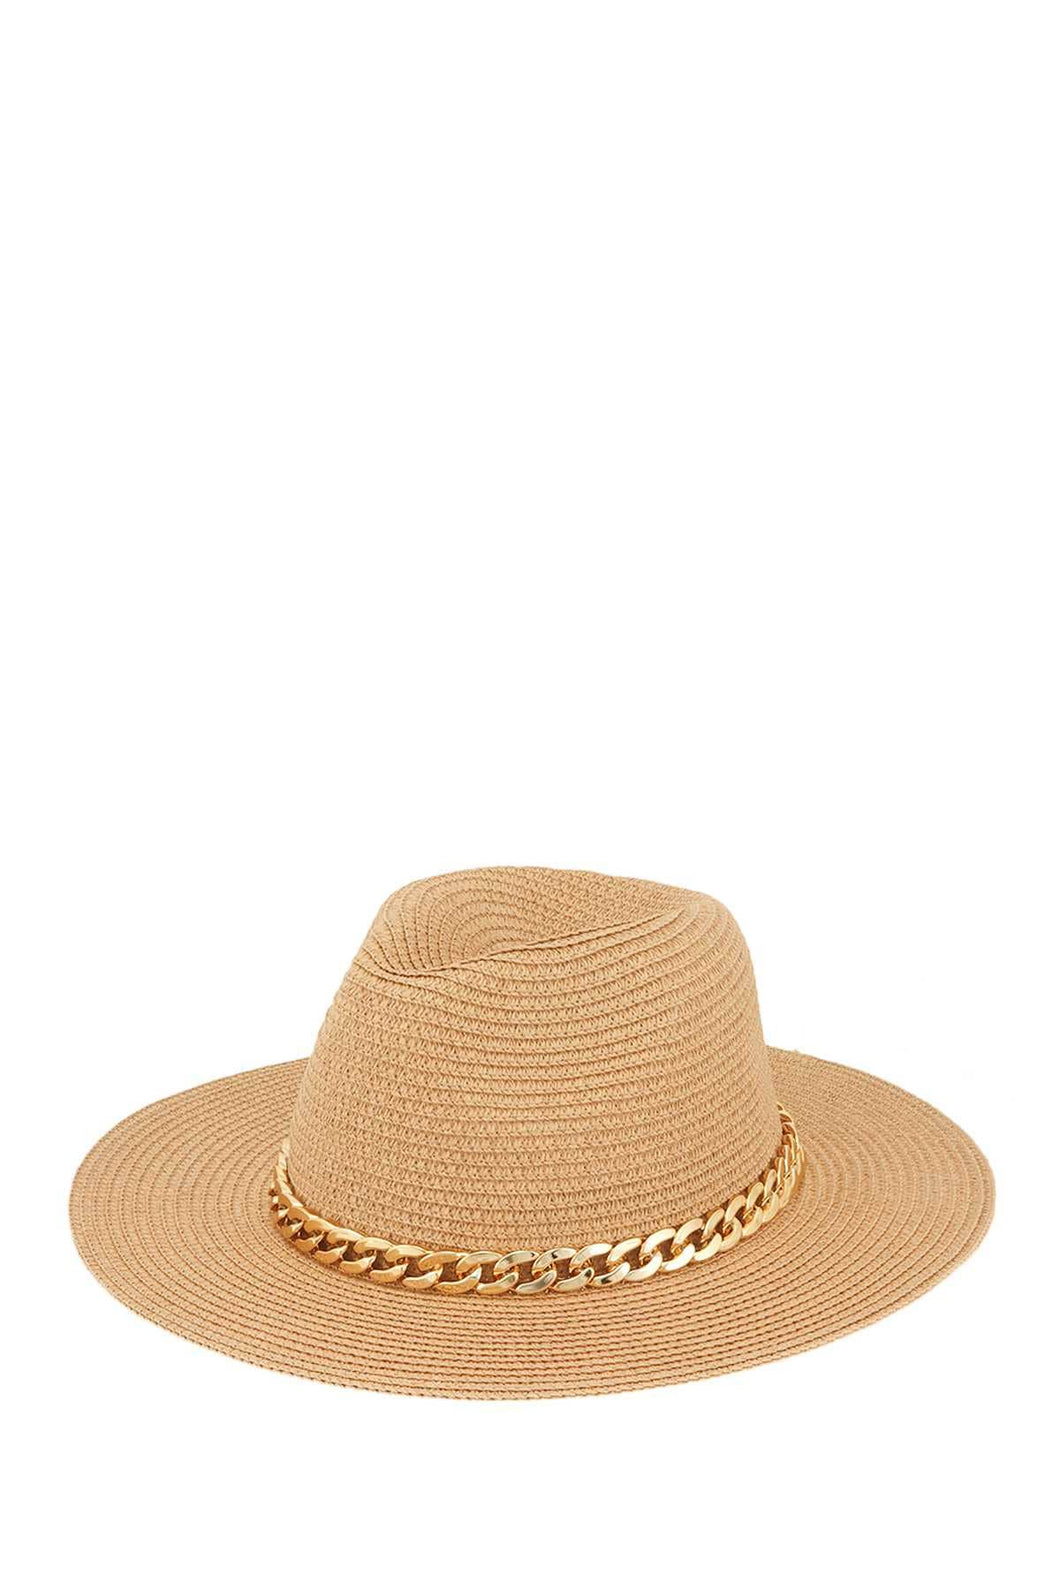 Fedora Straw Hat with Cuban Chain Accent